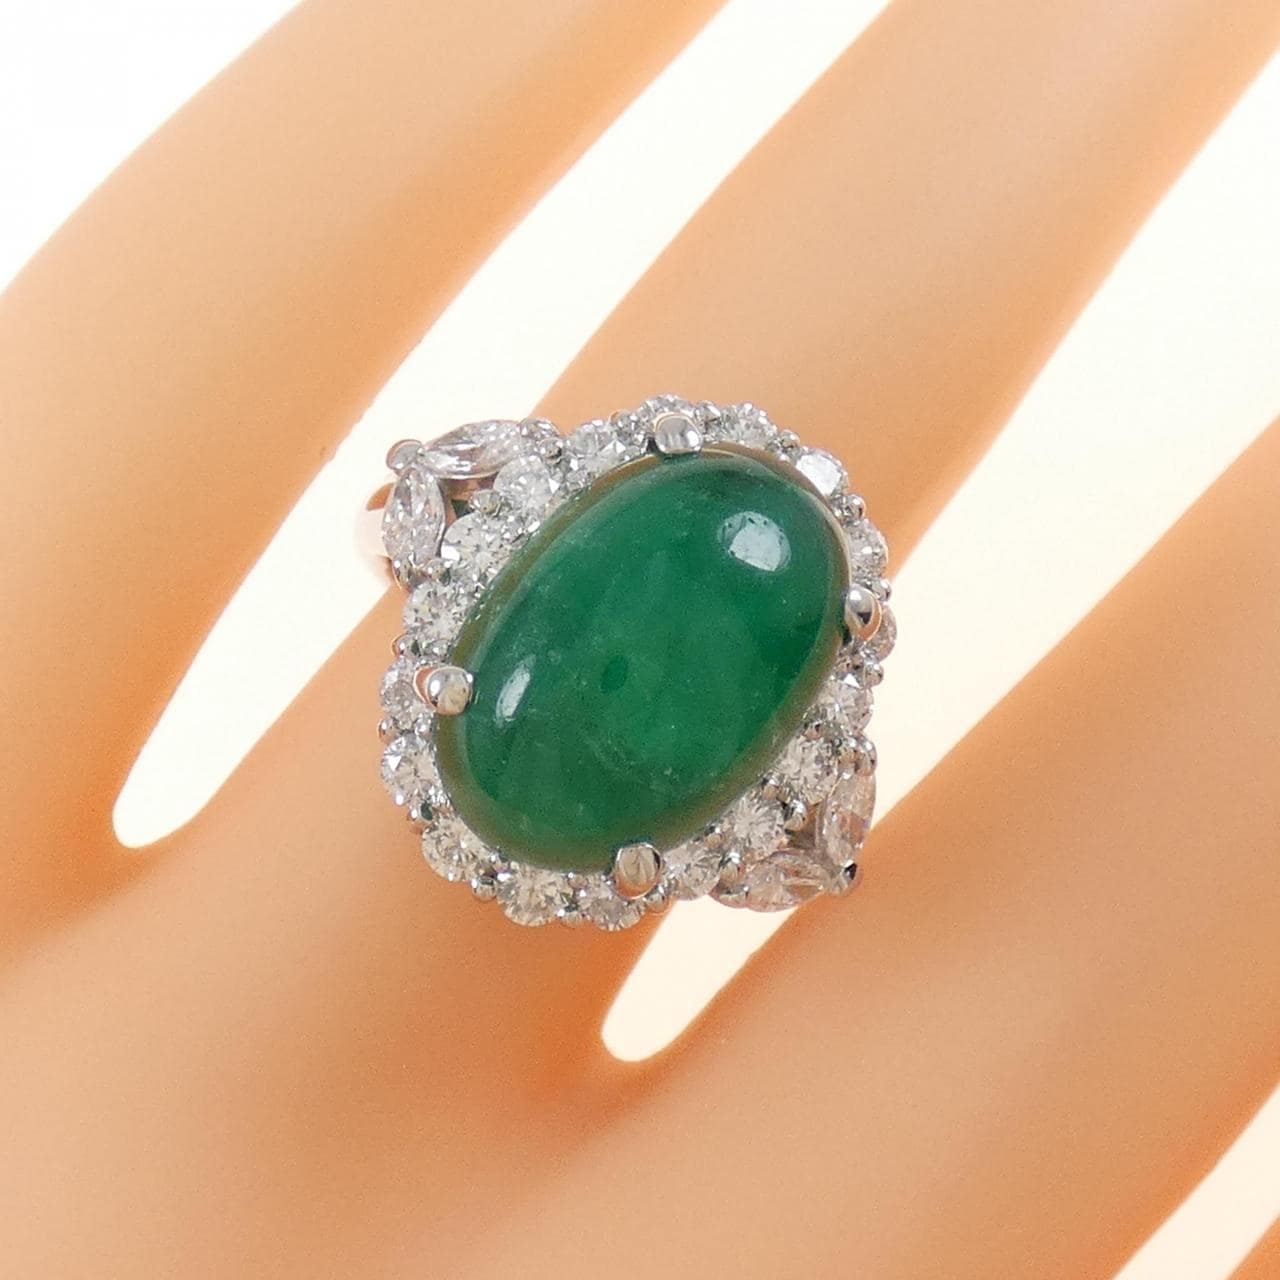 PT Emerald Ring 8.28CT Made in Colombia